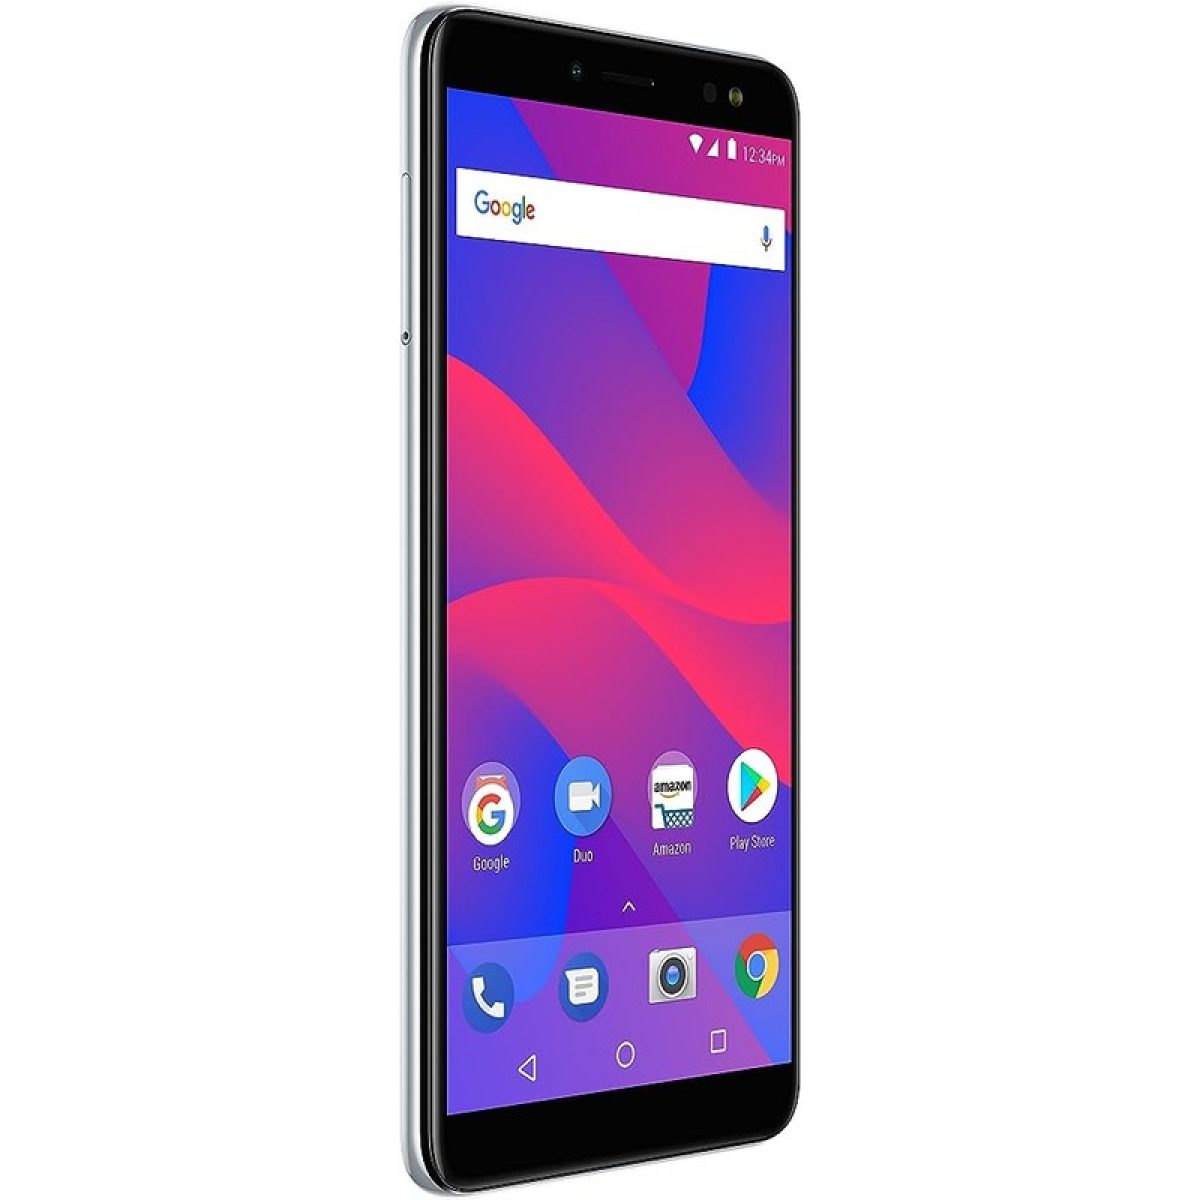 Android Pie coming to Vivo handsets in Q4, X21 apparently the first on the  list -  News